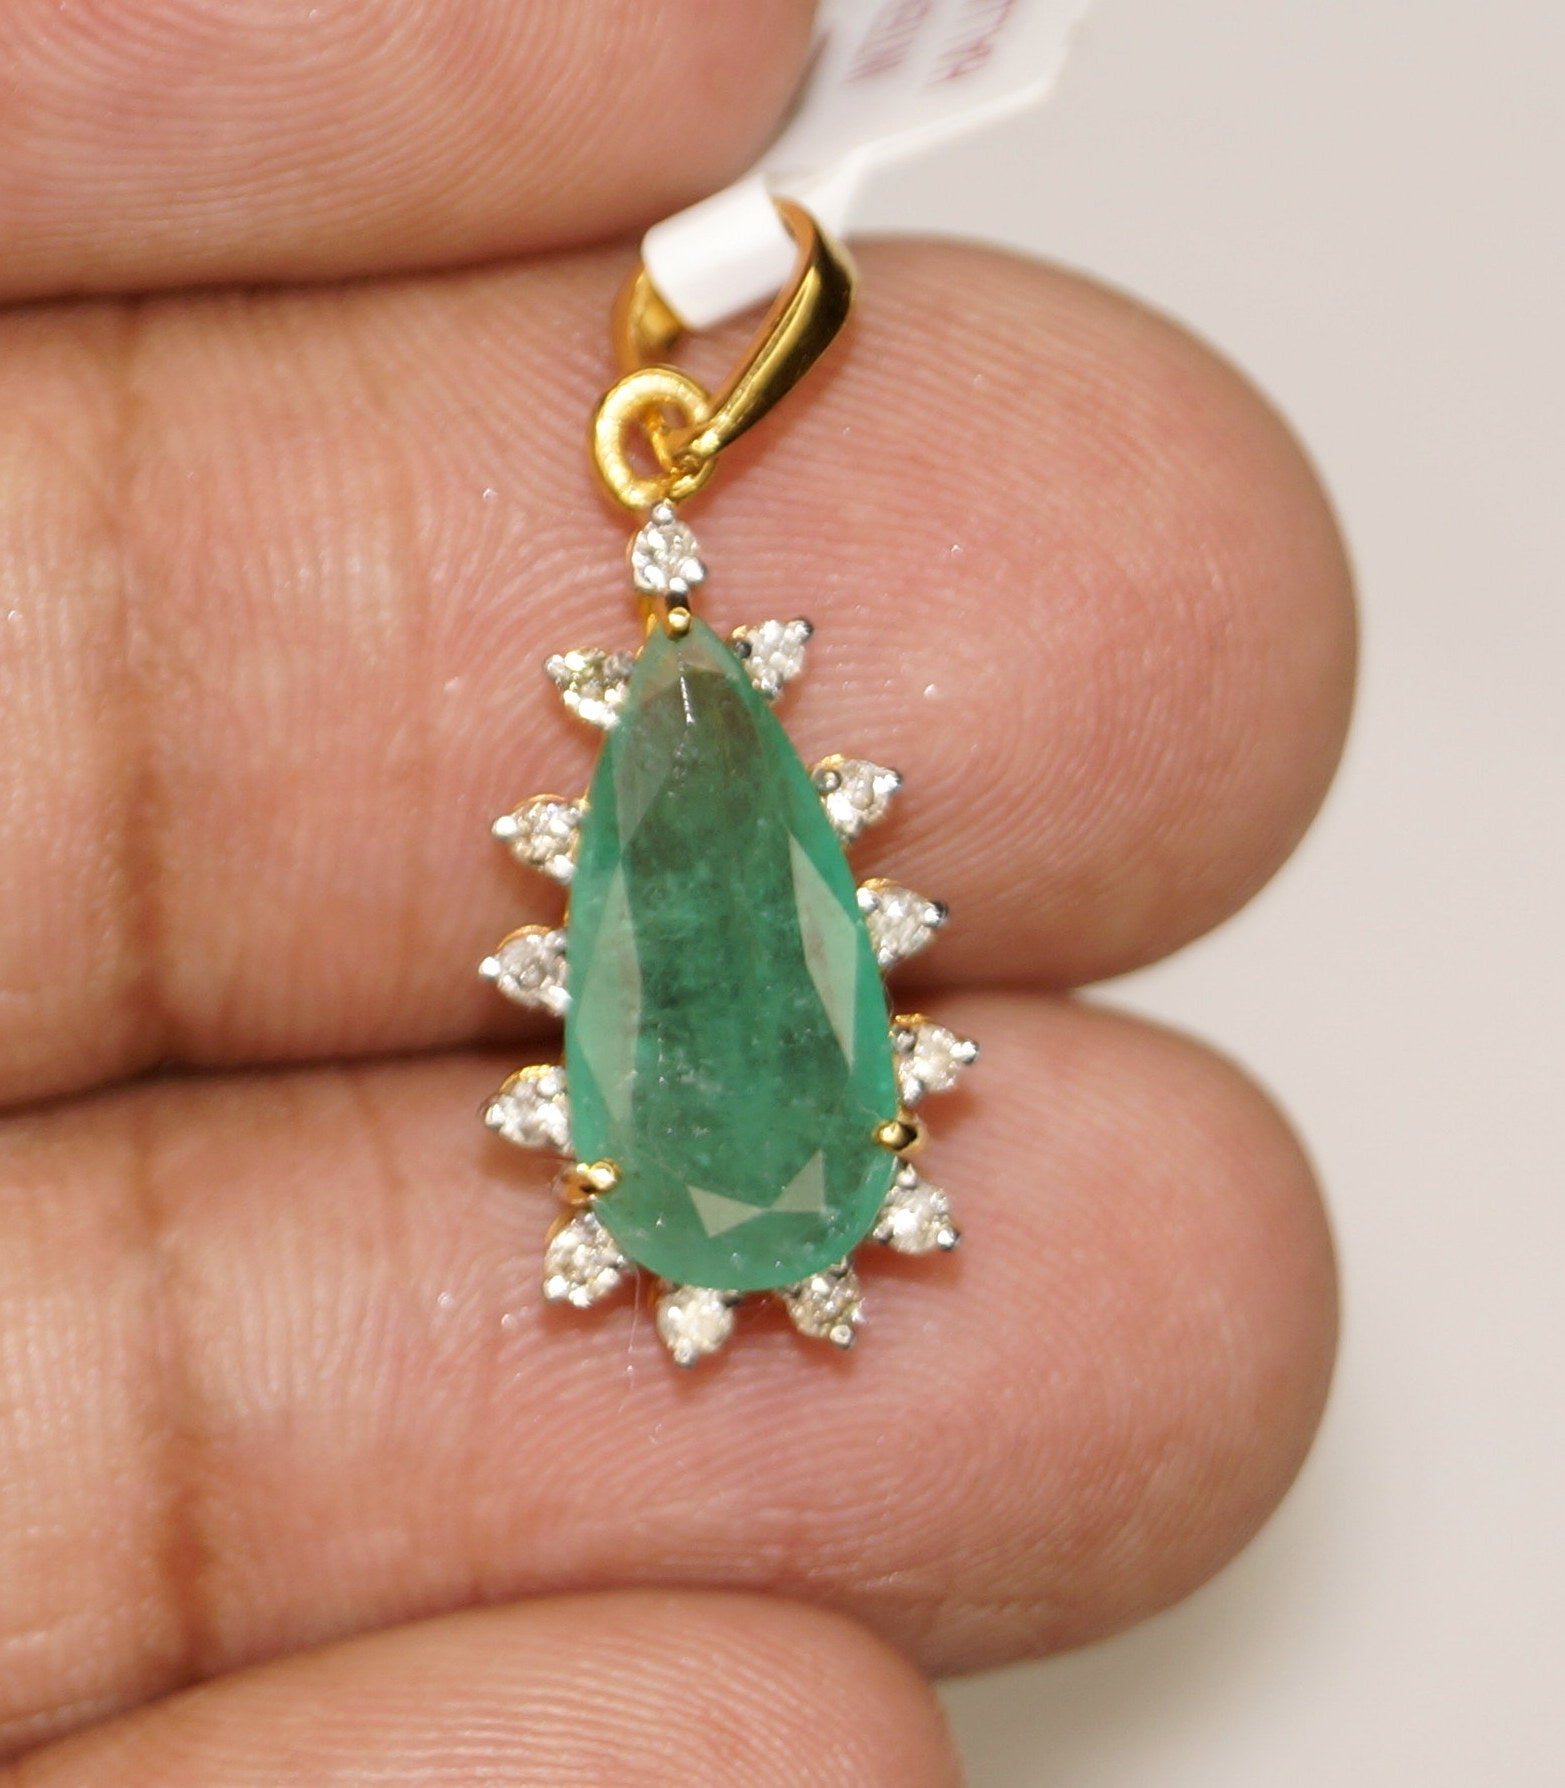 Immerse yourself in the luxurious elegance of this stunning pendant, meticulously crafted for those who appreciate fine jewelry. The centerpiece of this pendant is a magnificent 2.66-carat natural Zambian emerald, renowned for its rich, vivid green